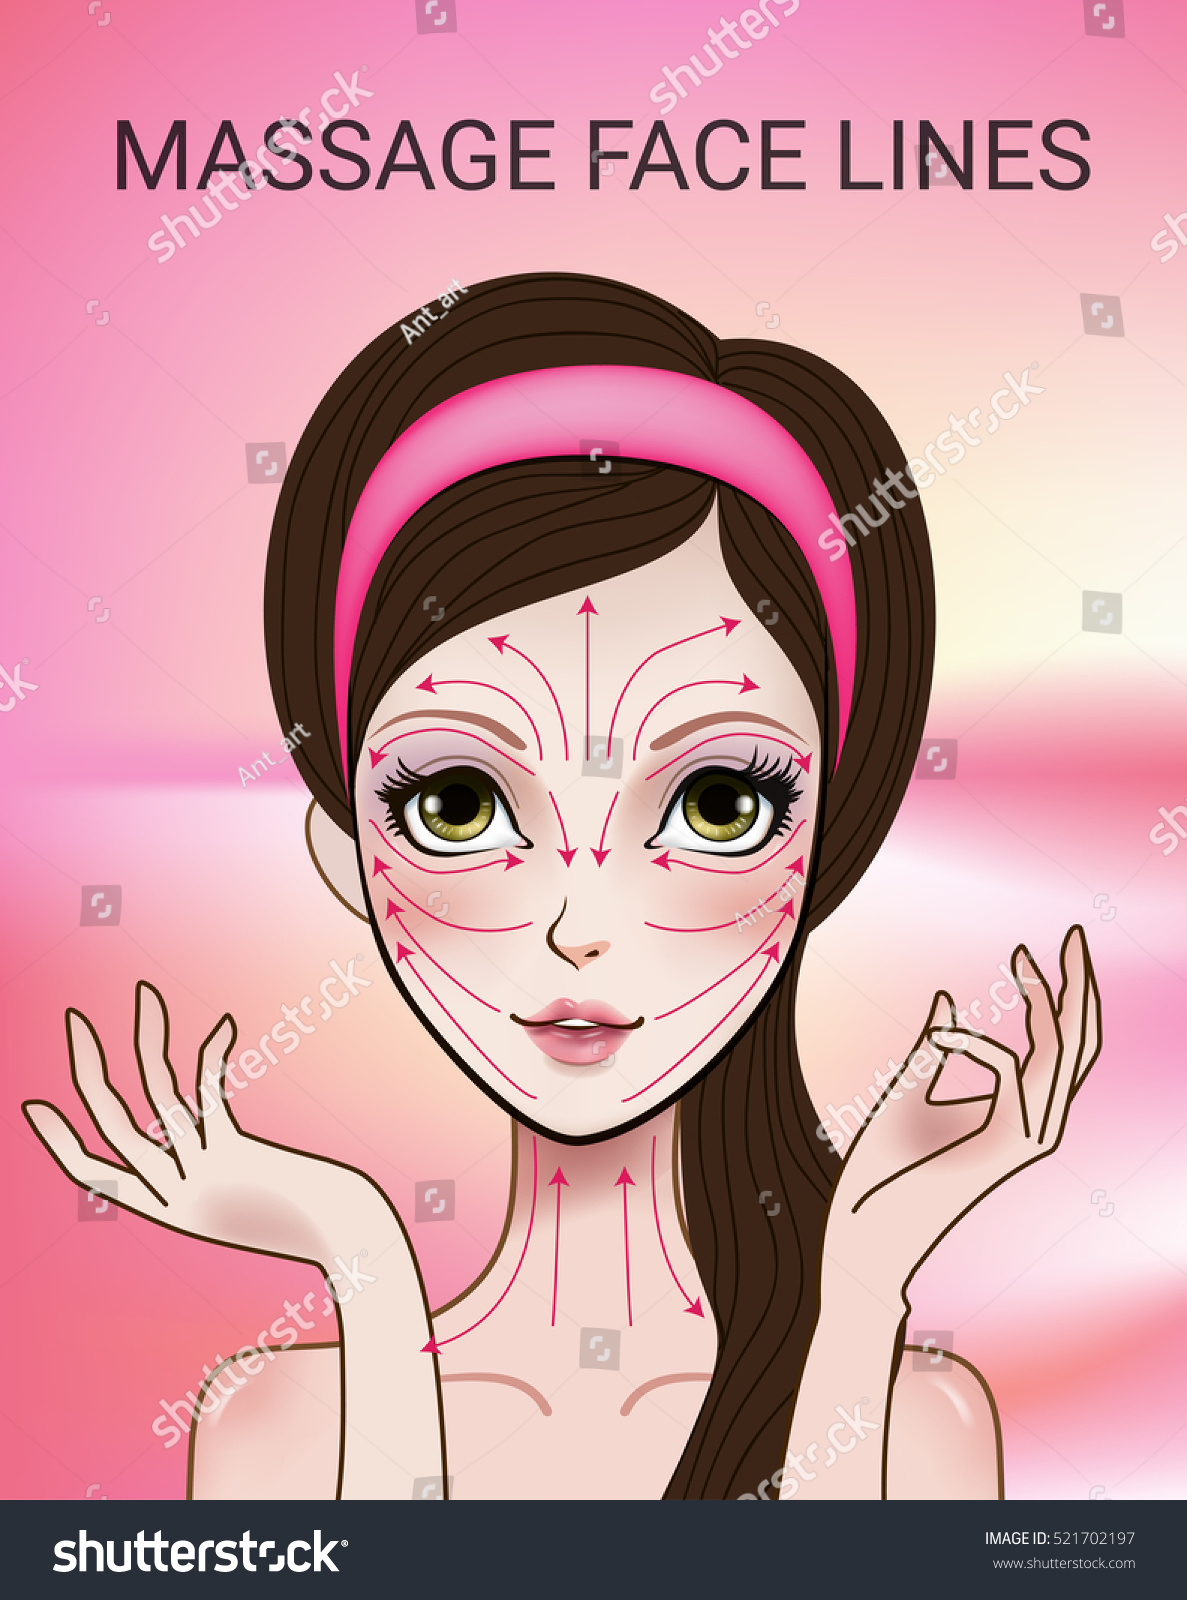 Vector Illustration With Face Massage Lines Royalty Free Stock Vector 521702197 